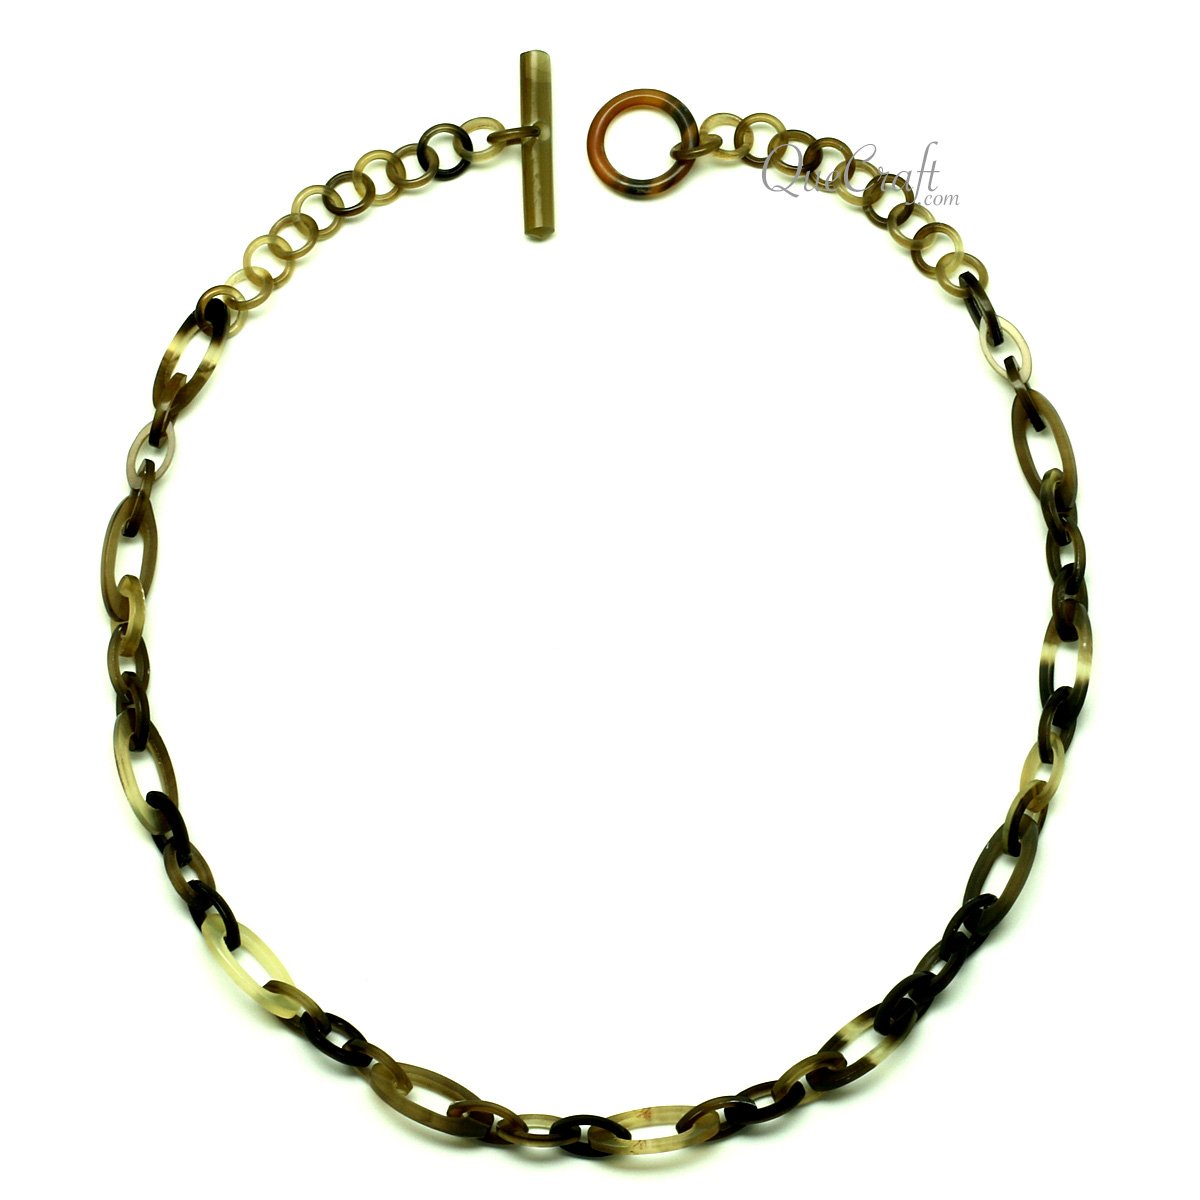 Horn Chain Necklace #13176 - HORN JEWELRY